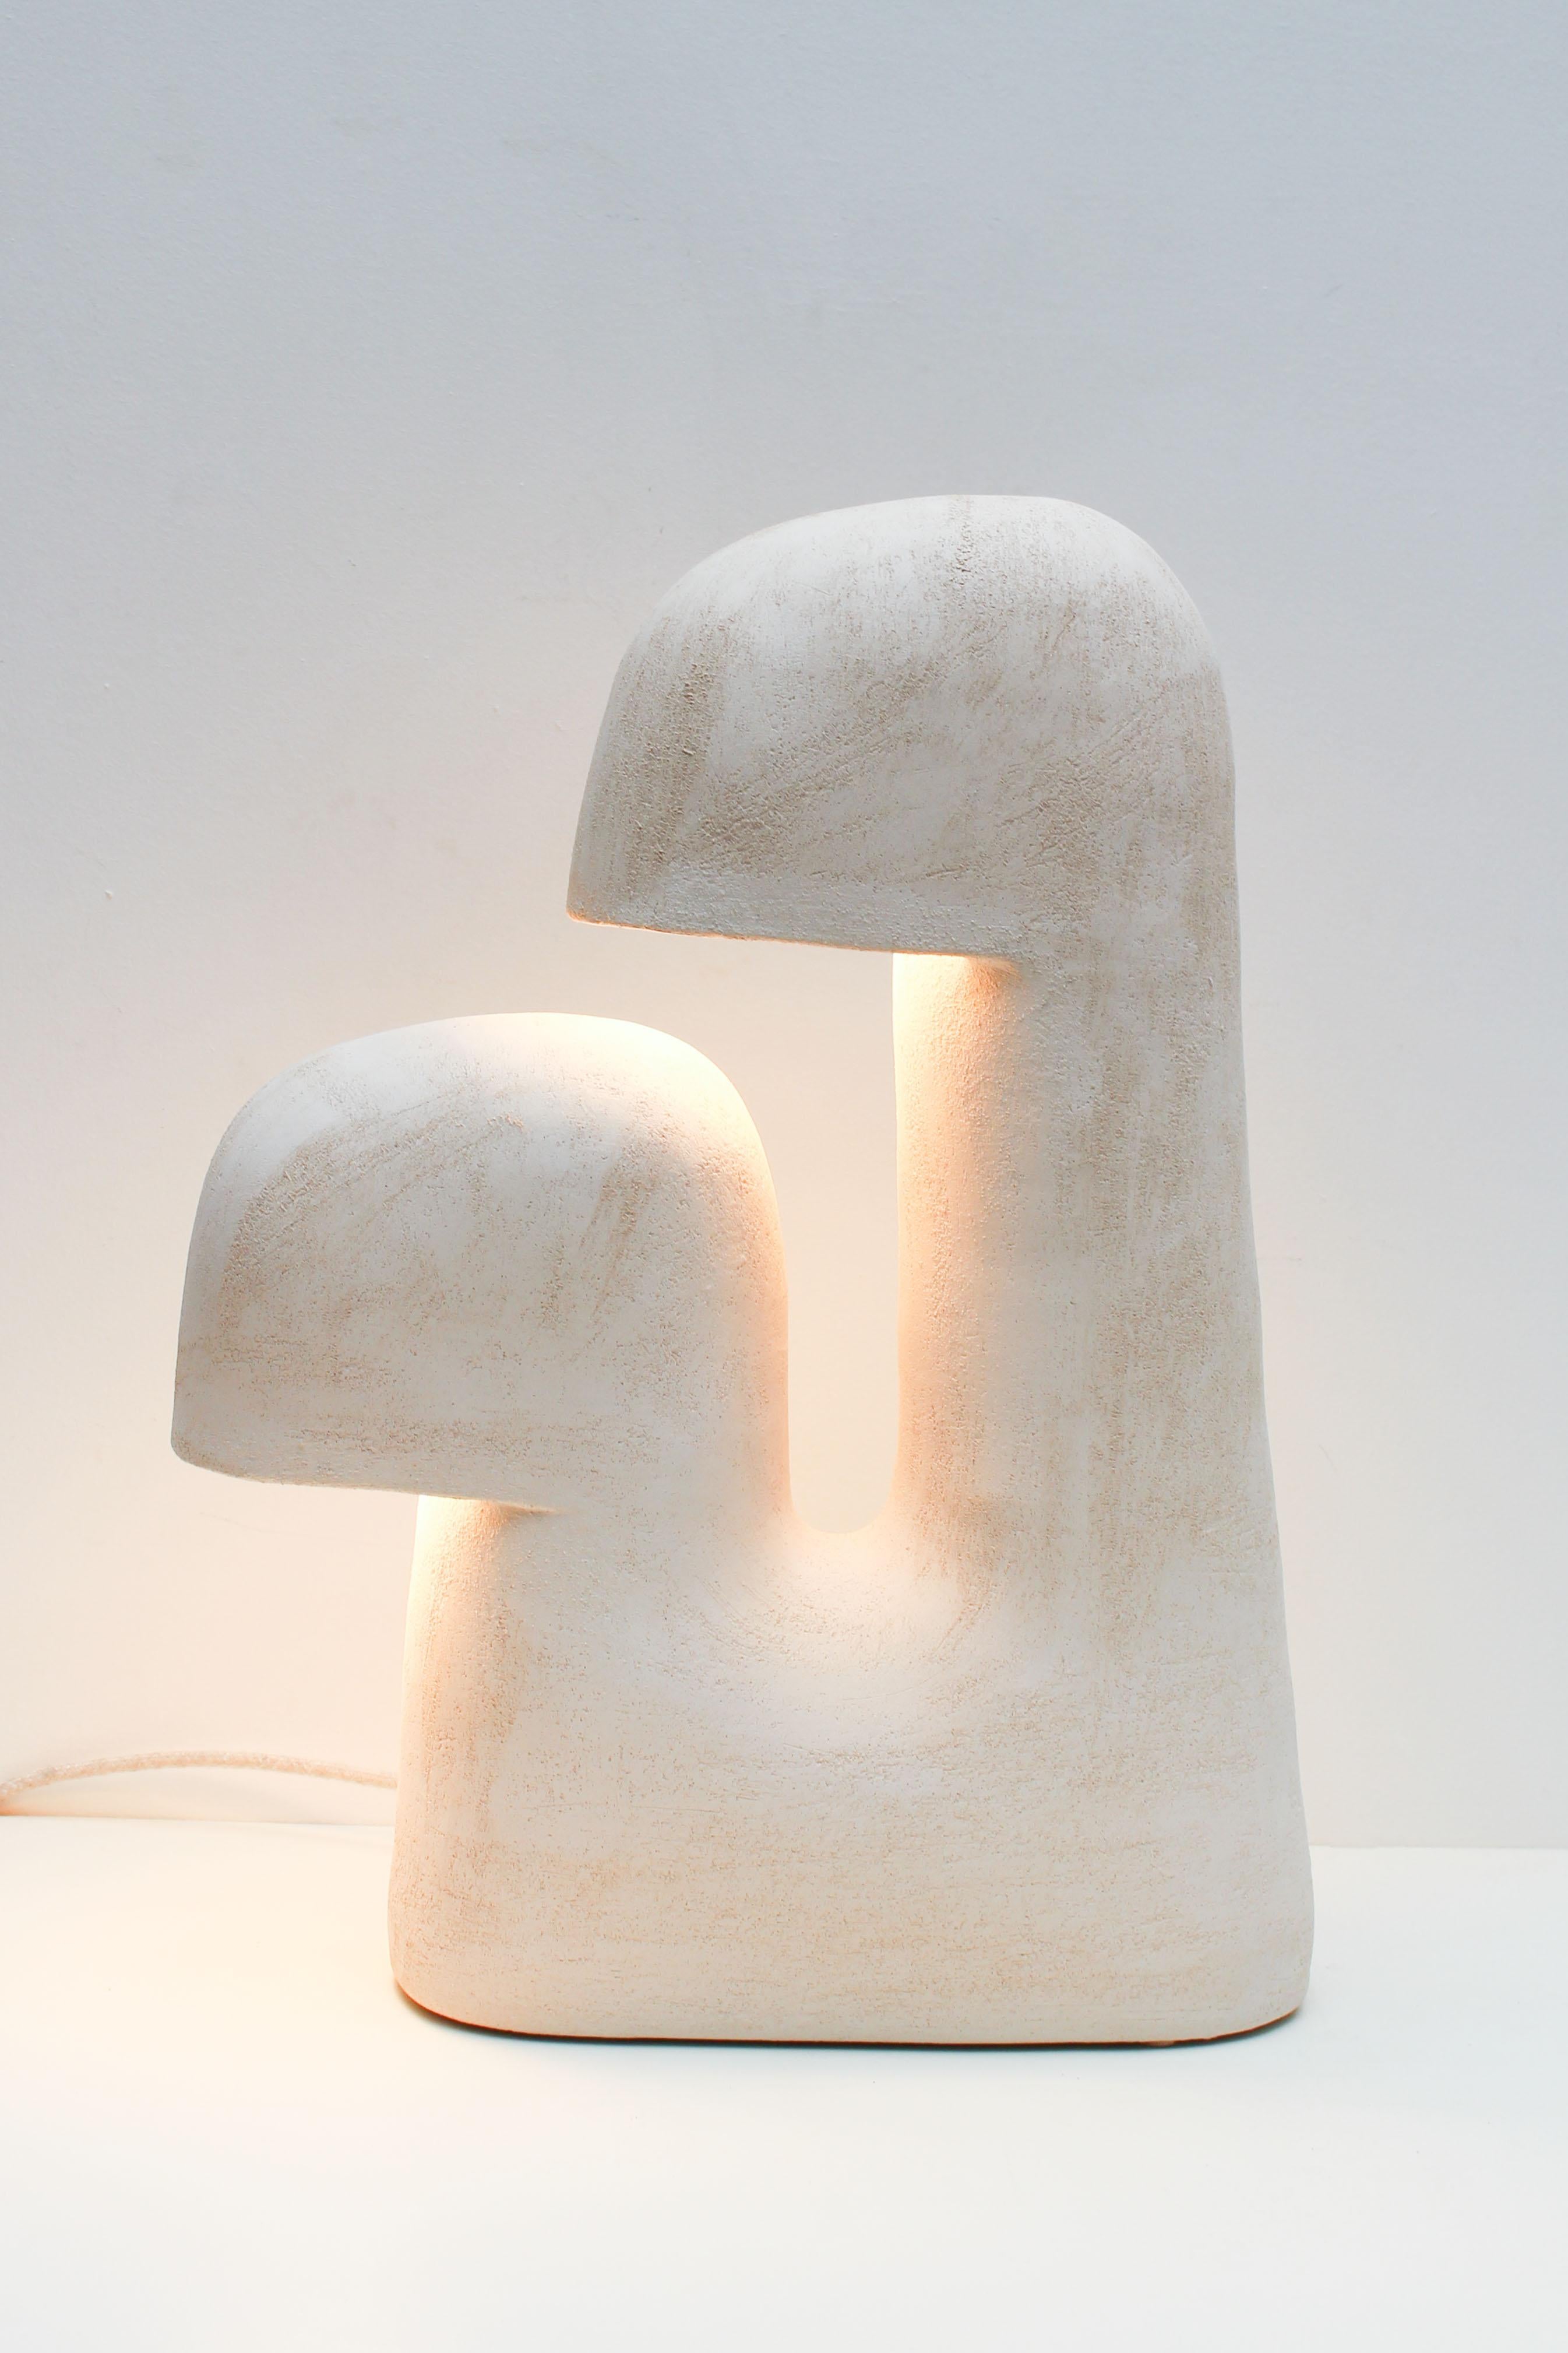 Édifice white stoneware table lamp by Elisa Uberti
Materials: White stoneware
Dimensions: 53 x 39 x 15 cm

After fifteen years in fashion, Elisa Uberti decides to take the time to work with these hands and to give birth to new projects.

Designer